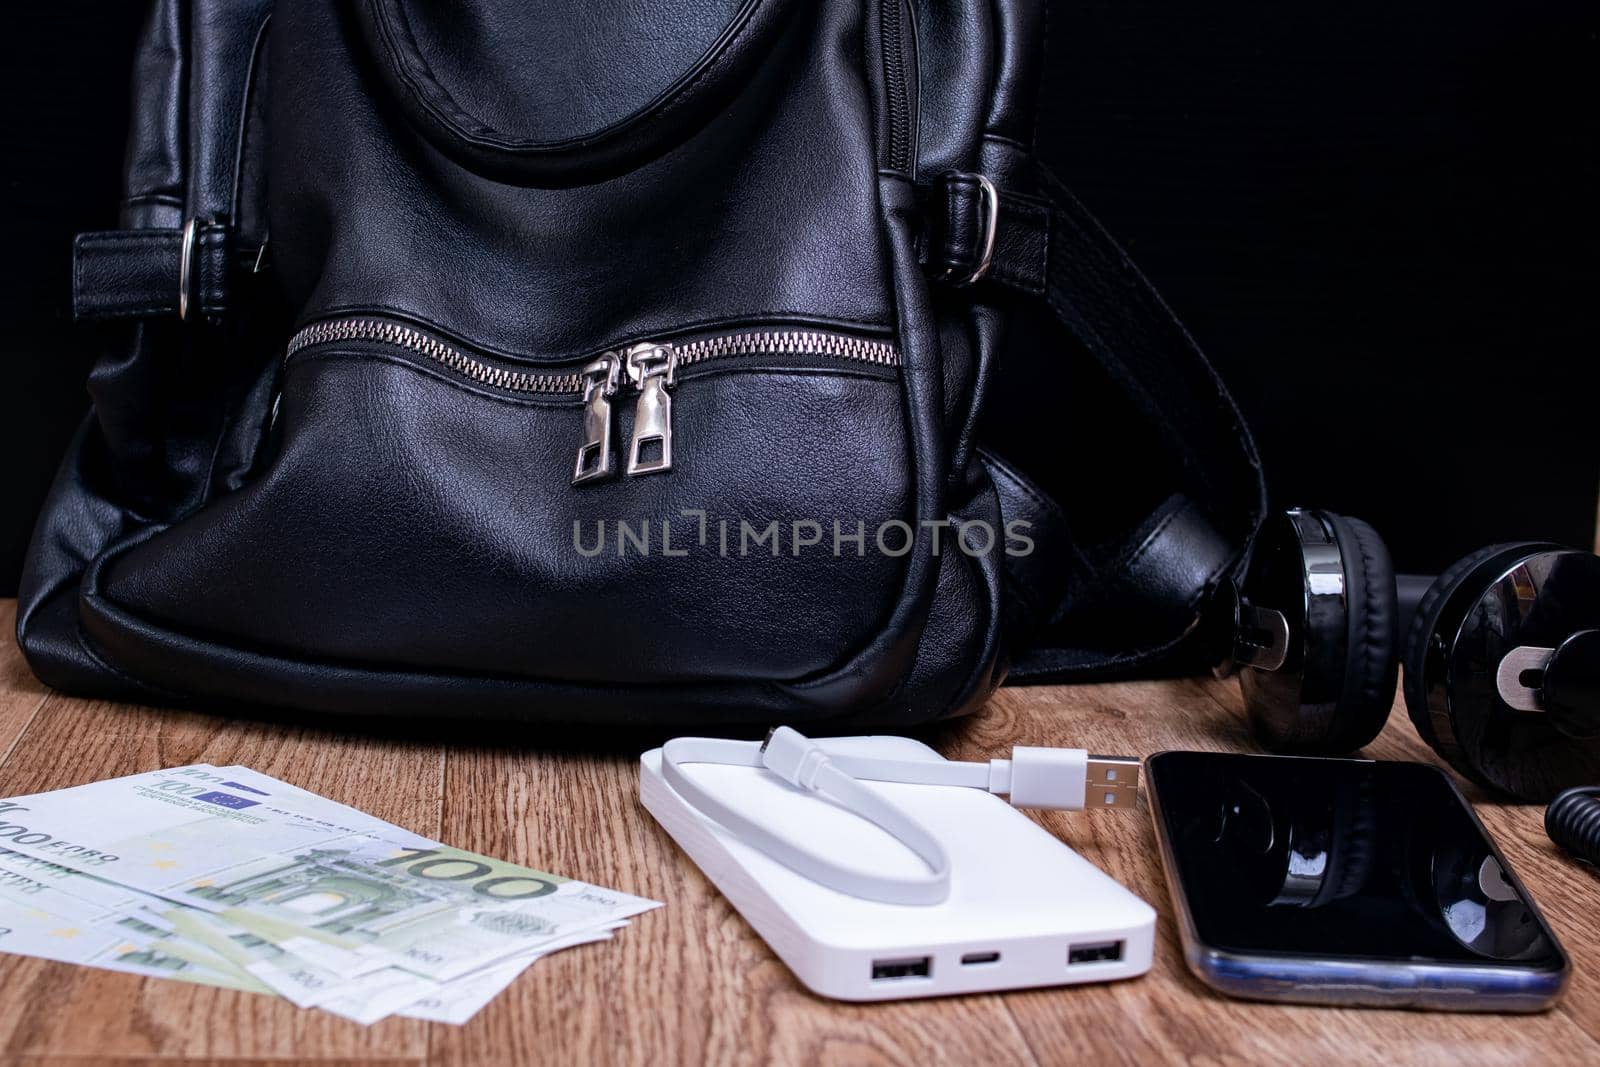 Mobile phone, power bank, bag, money and headphones on wooden table by Vera1703